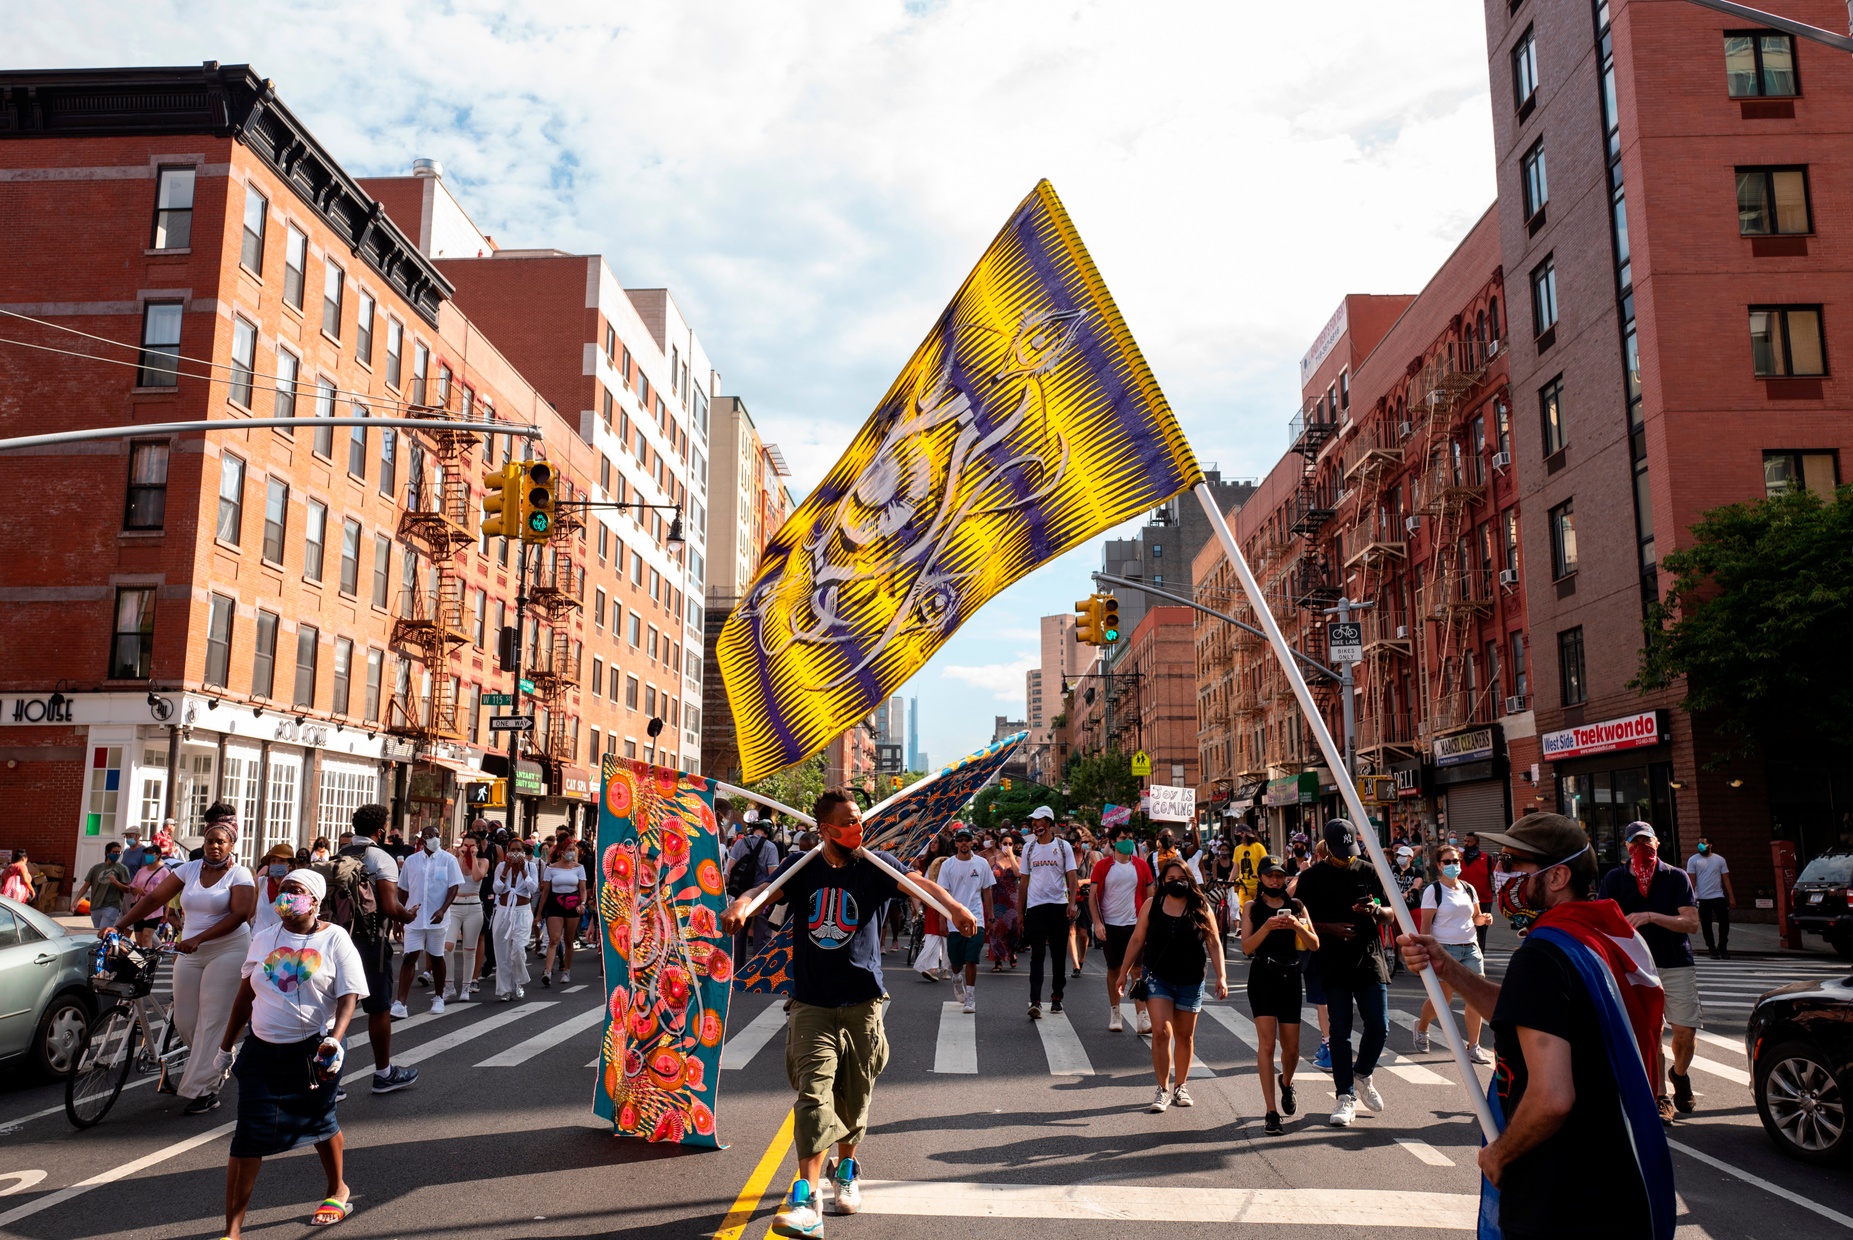 A photograph of a crowd walking in the street. A Black man in the center carries two flags, and a person in the foreground waves a purple and yellow flag.